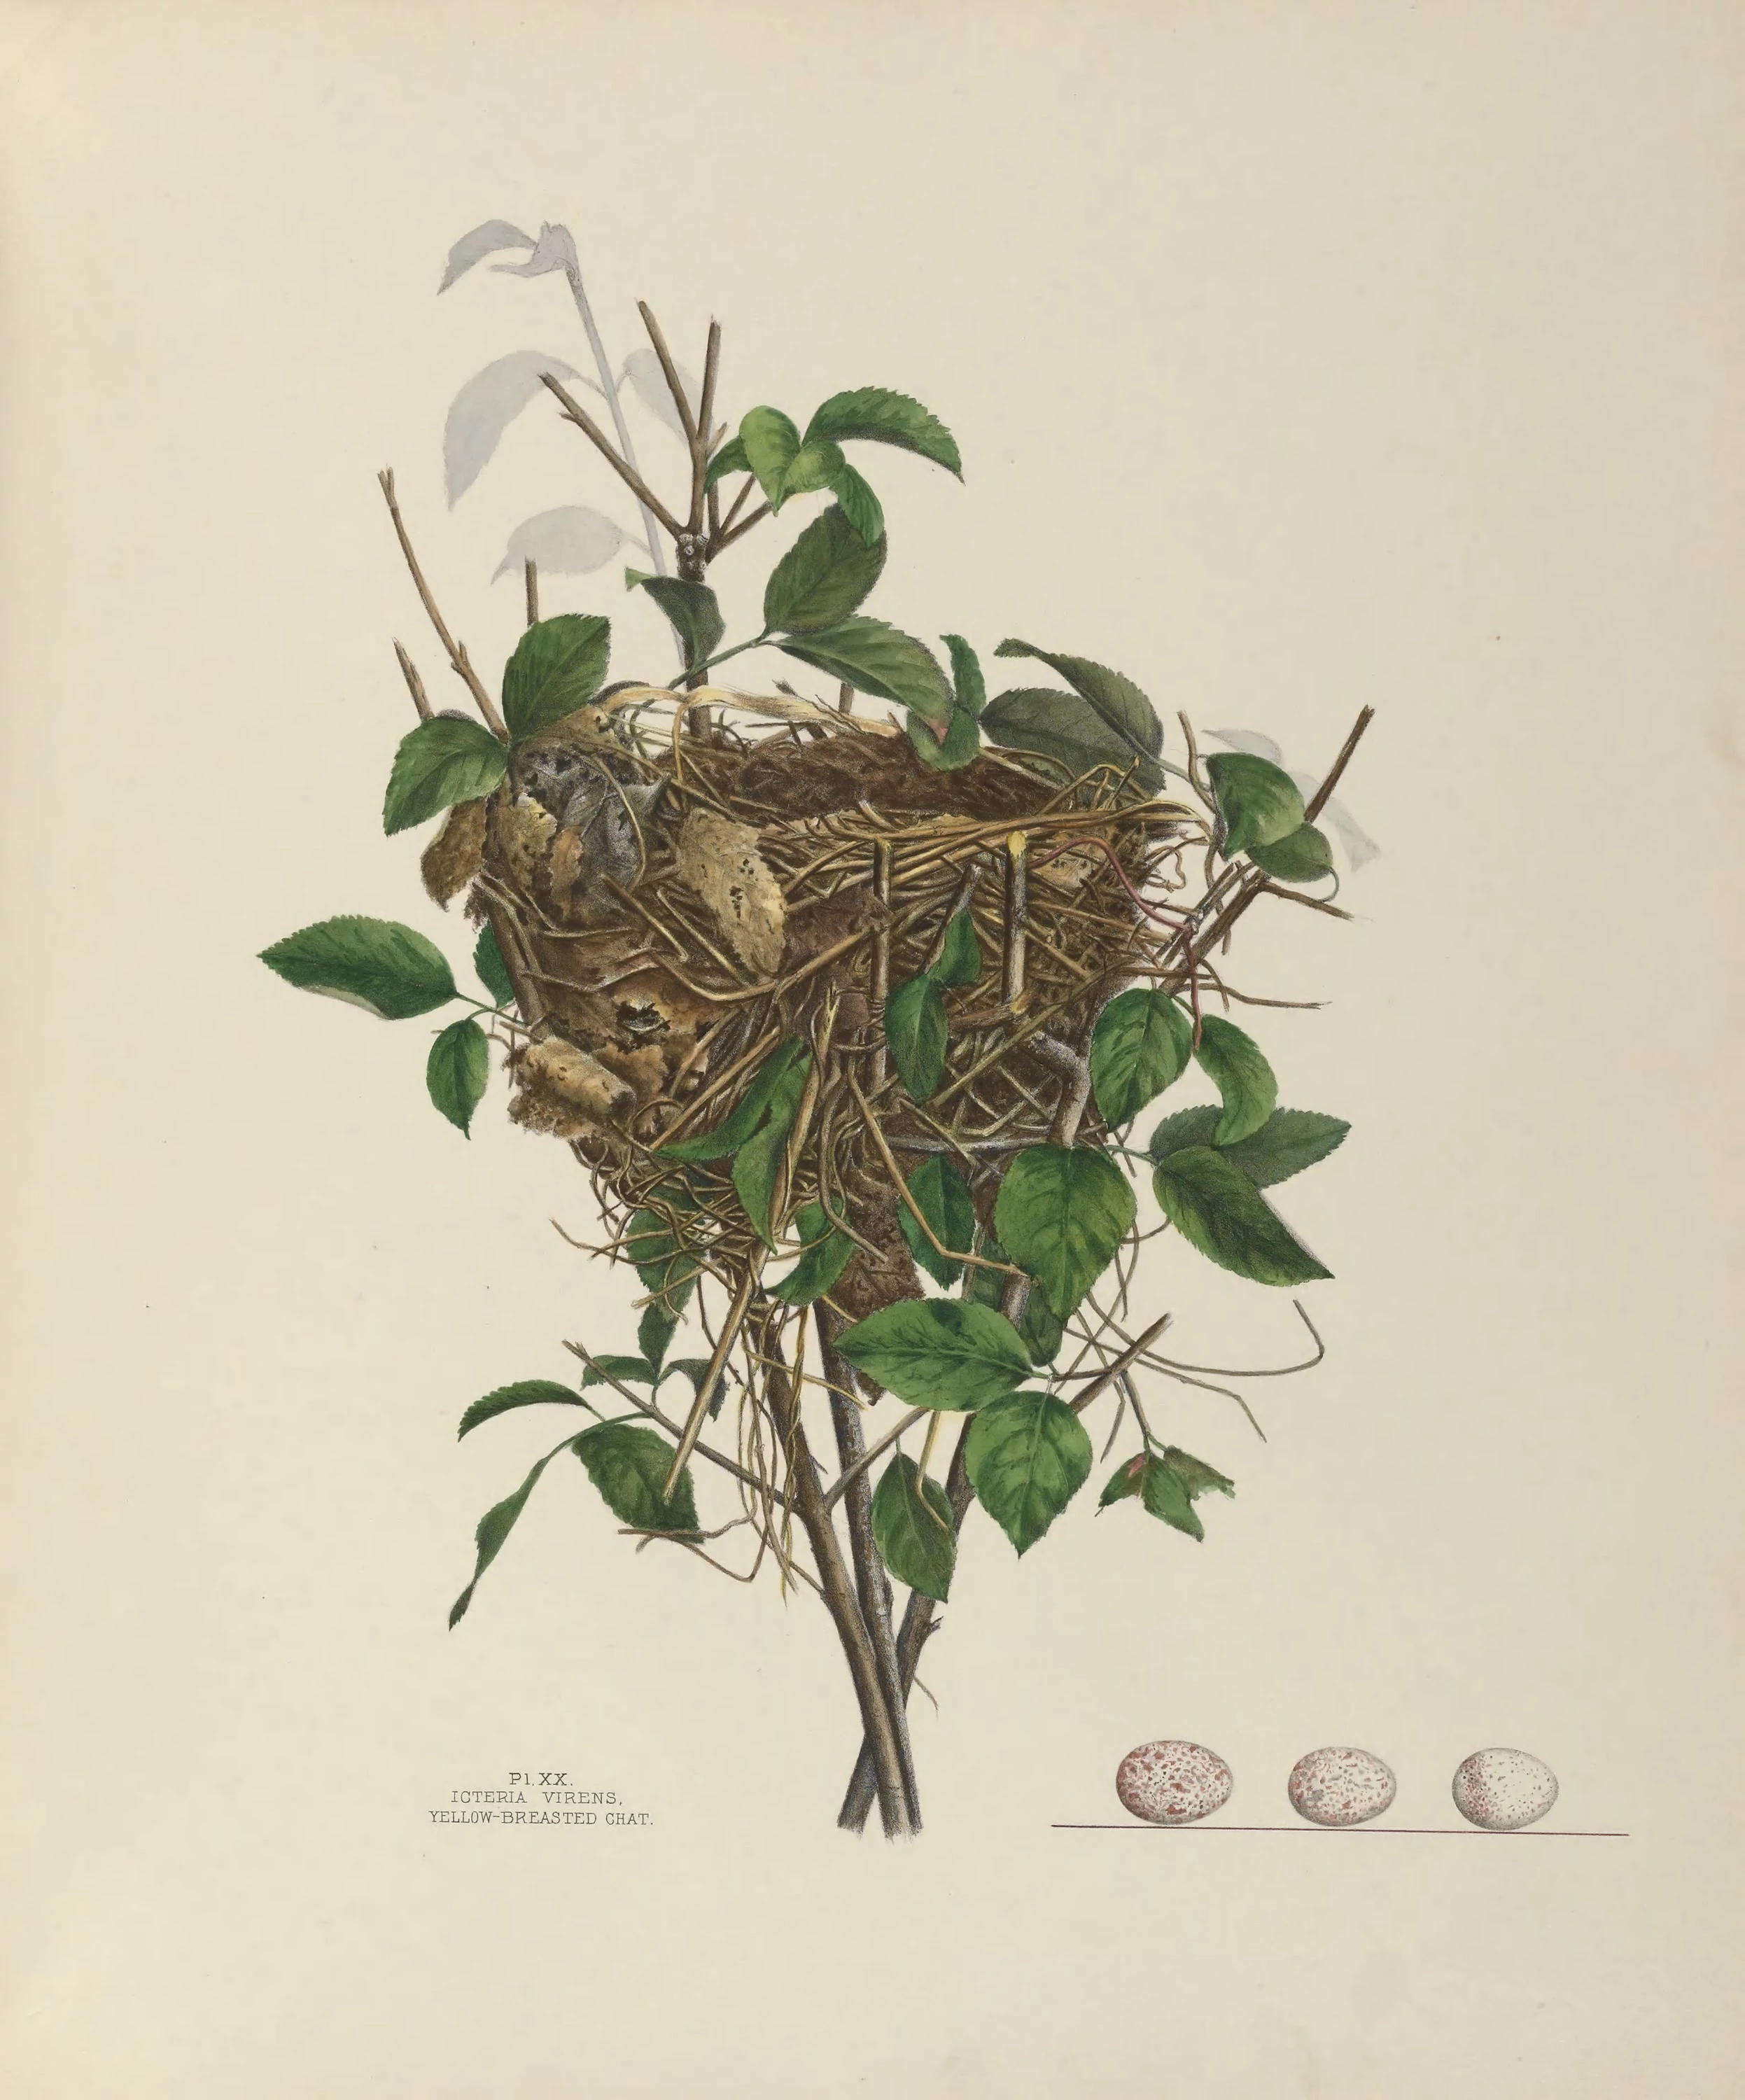 Plate 20. Yellow-Breasted Chat, Genevieve Jones